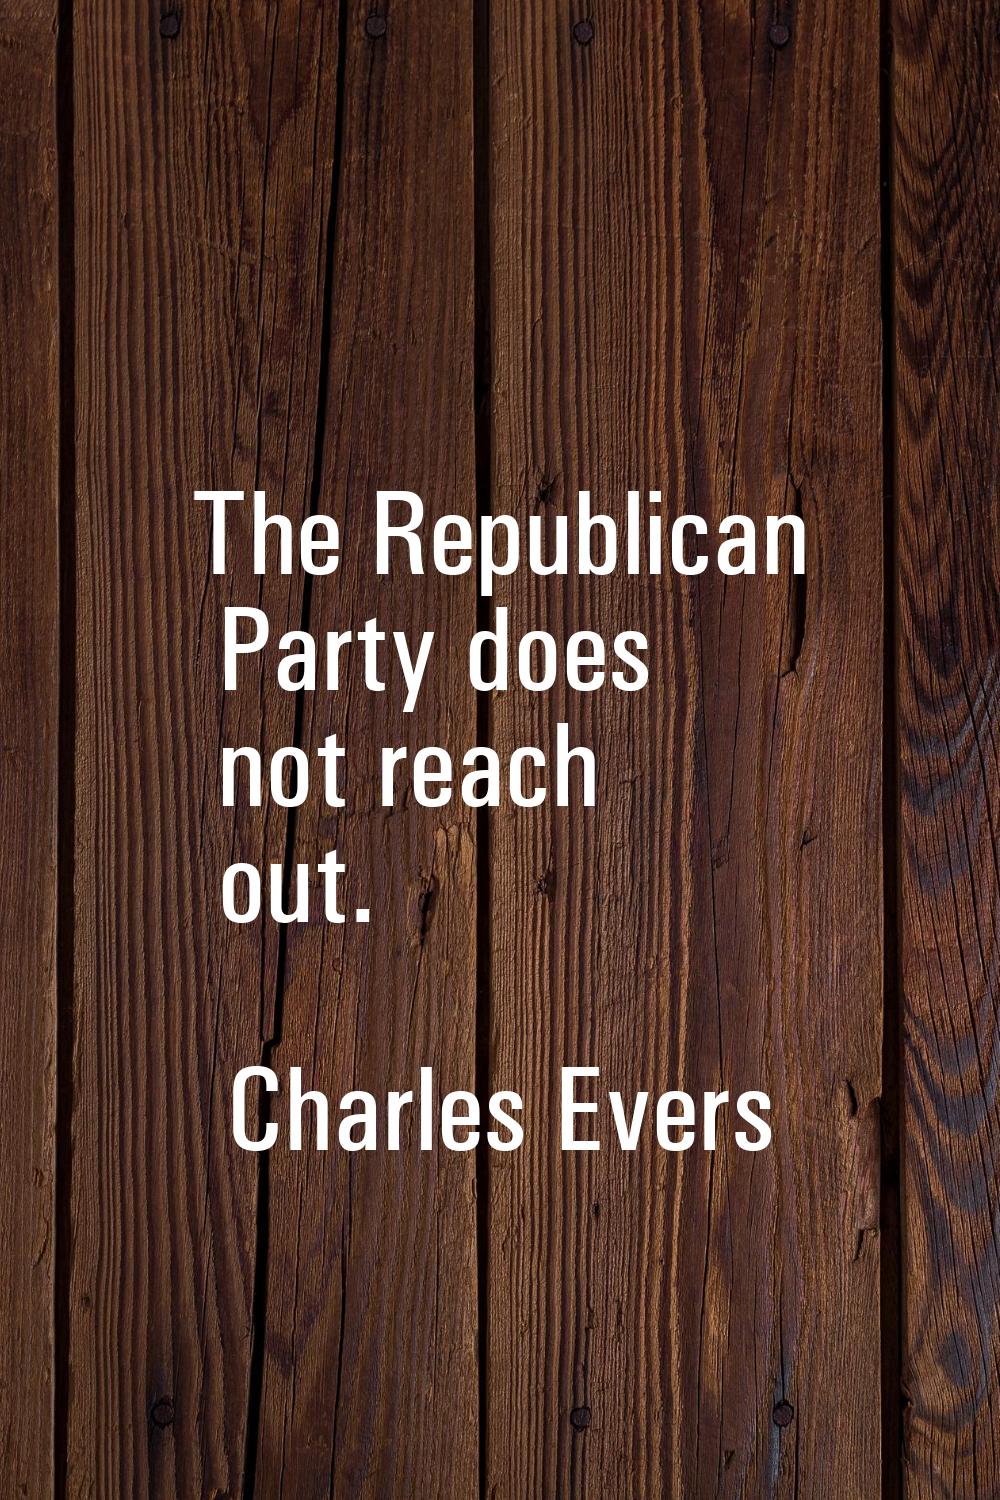 The Republican Party does not reach out.